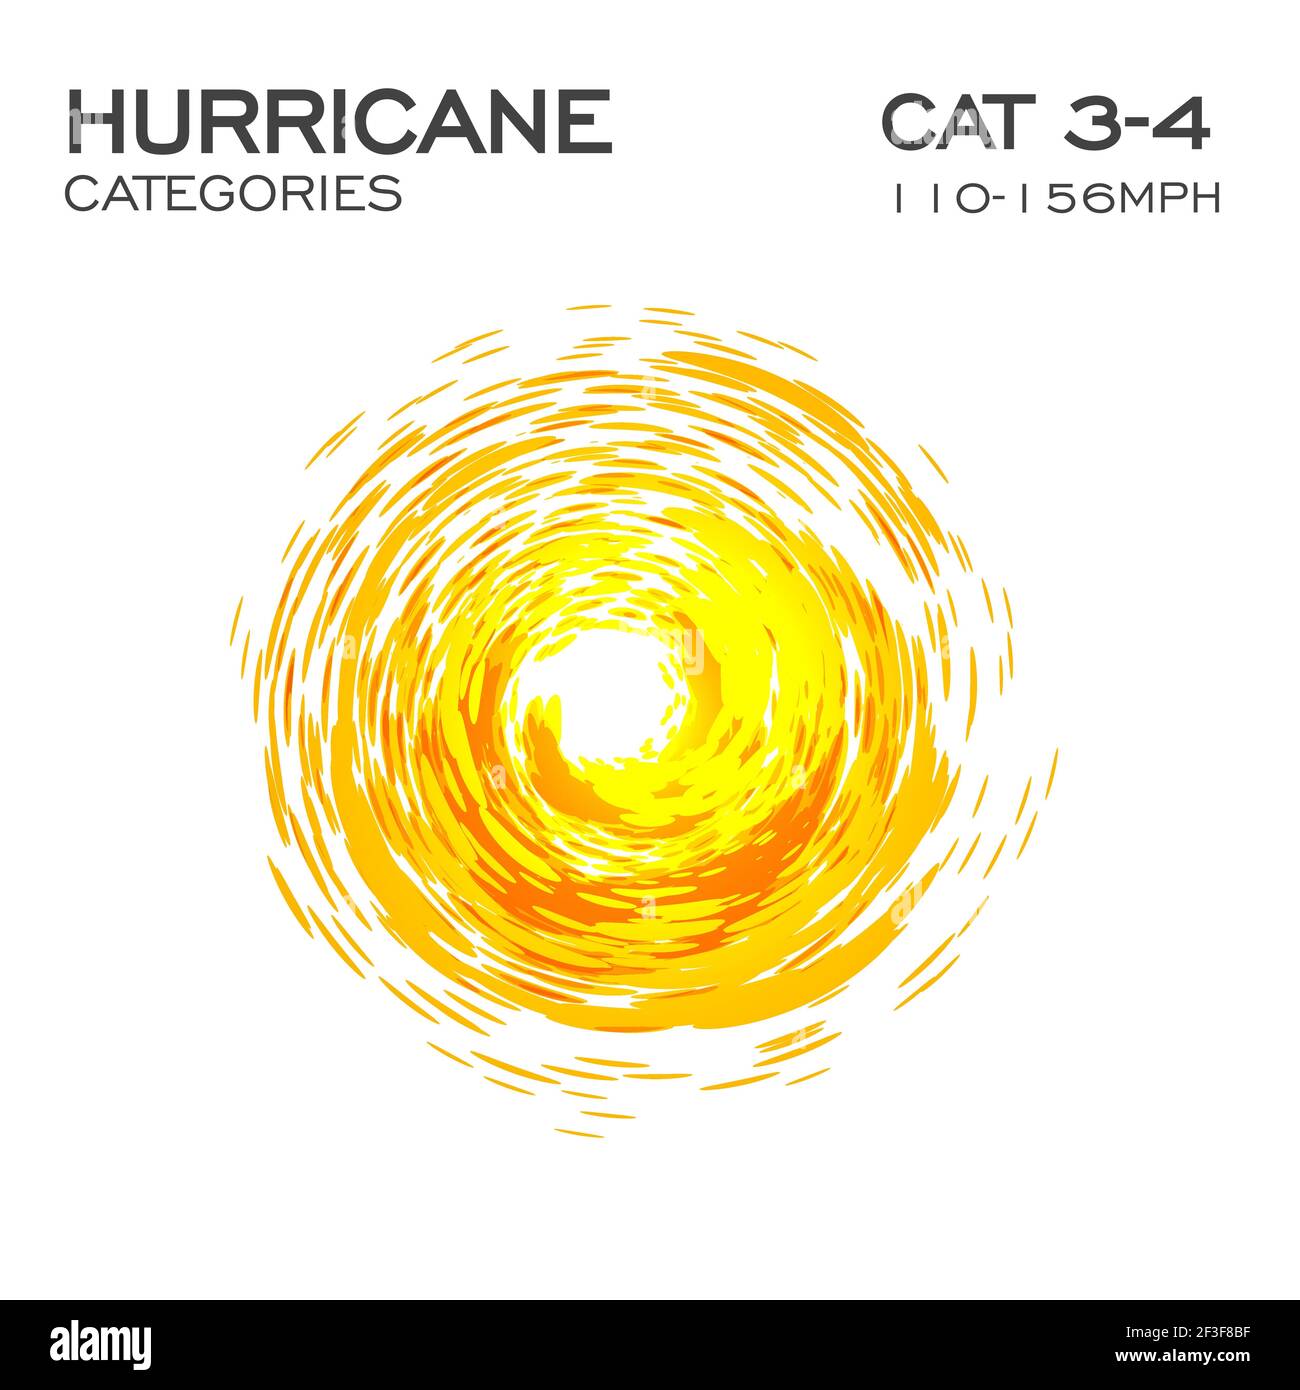 Category 3, 4 hurricane infographic element for hurricane breaking news and warning. Alert sign. Swirl funnel of clouds and dust, vector illustration. Stock Vector